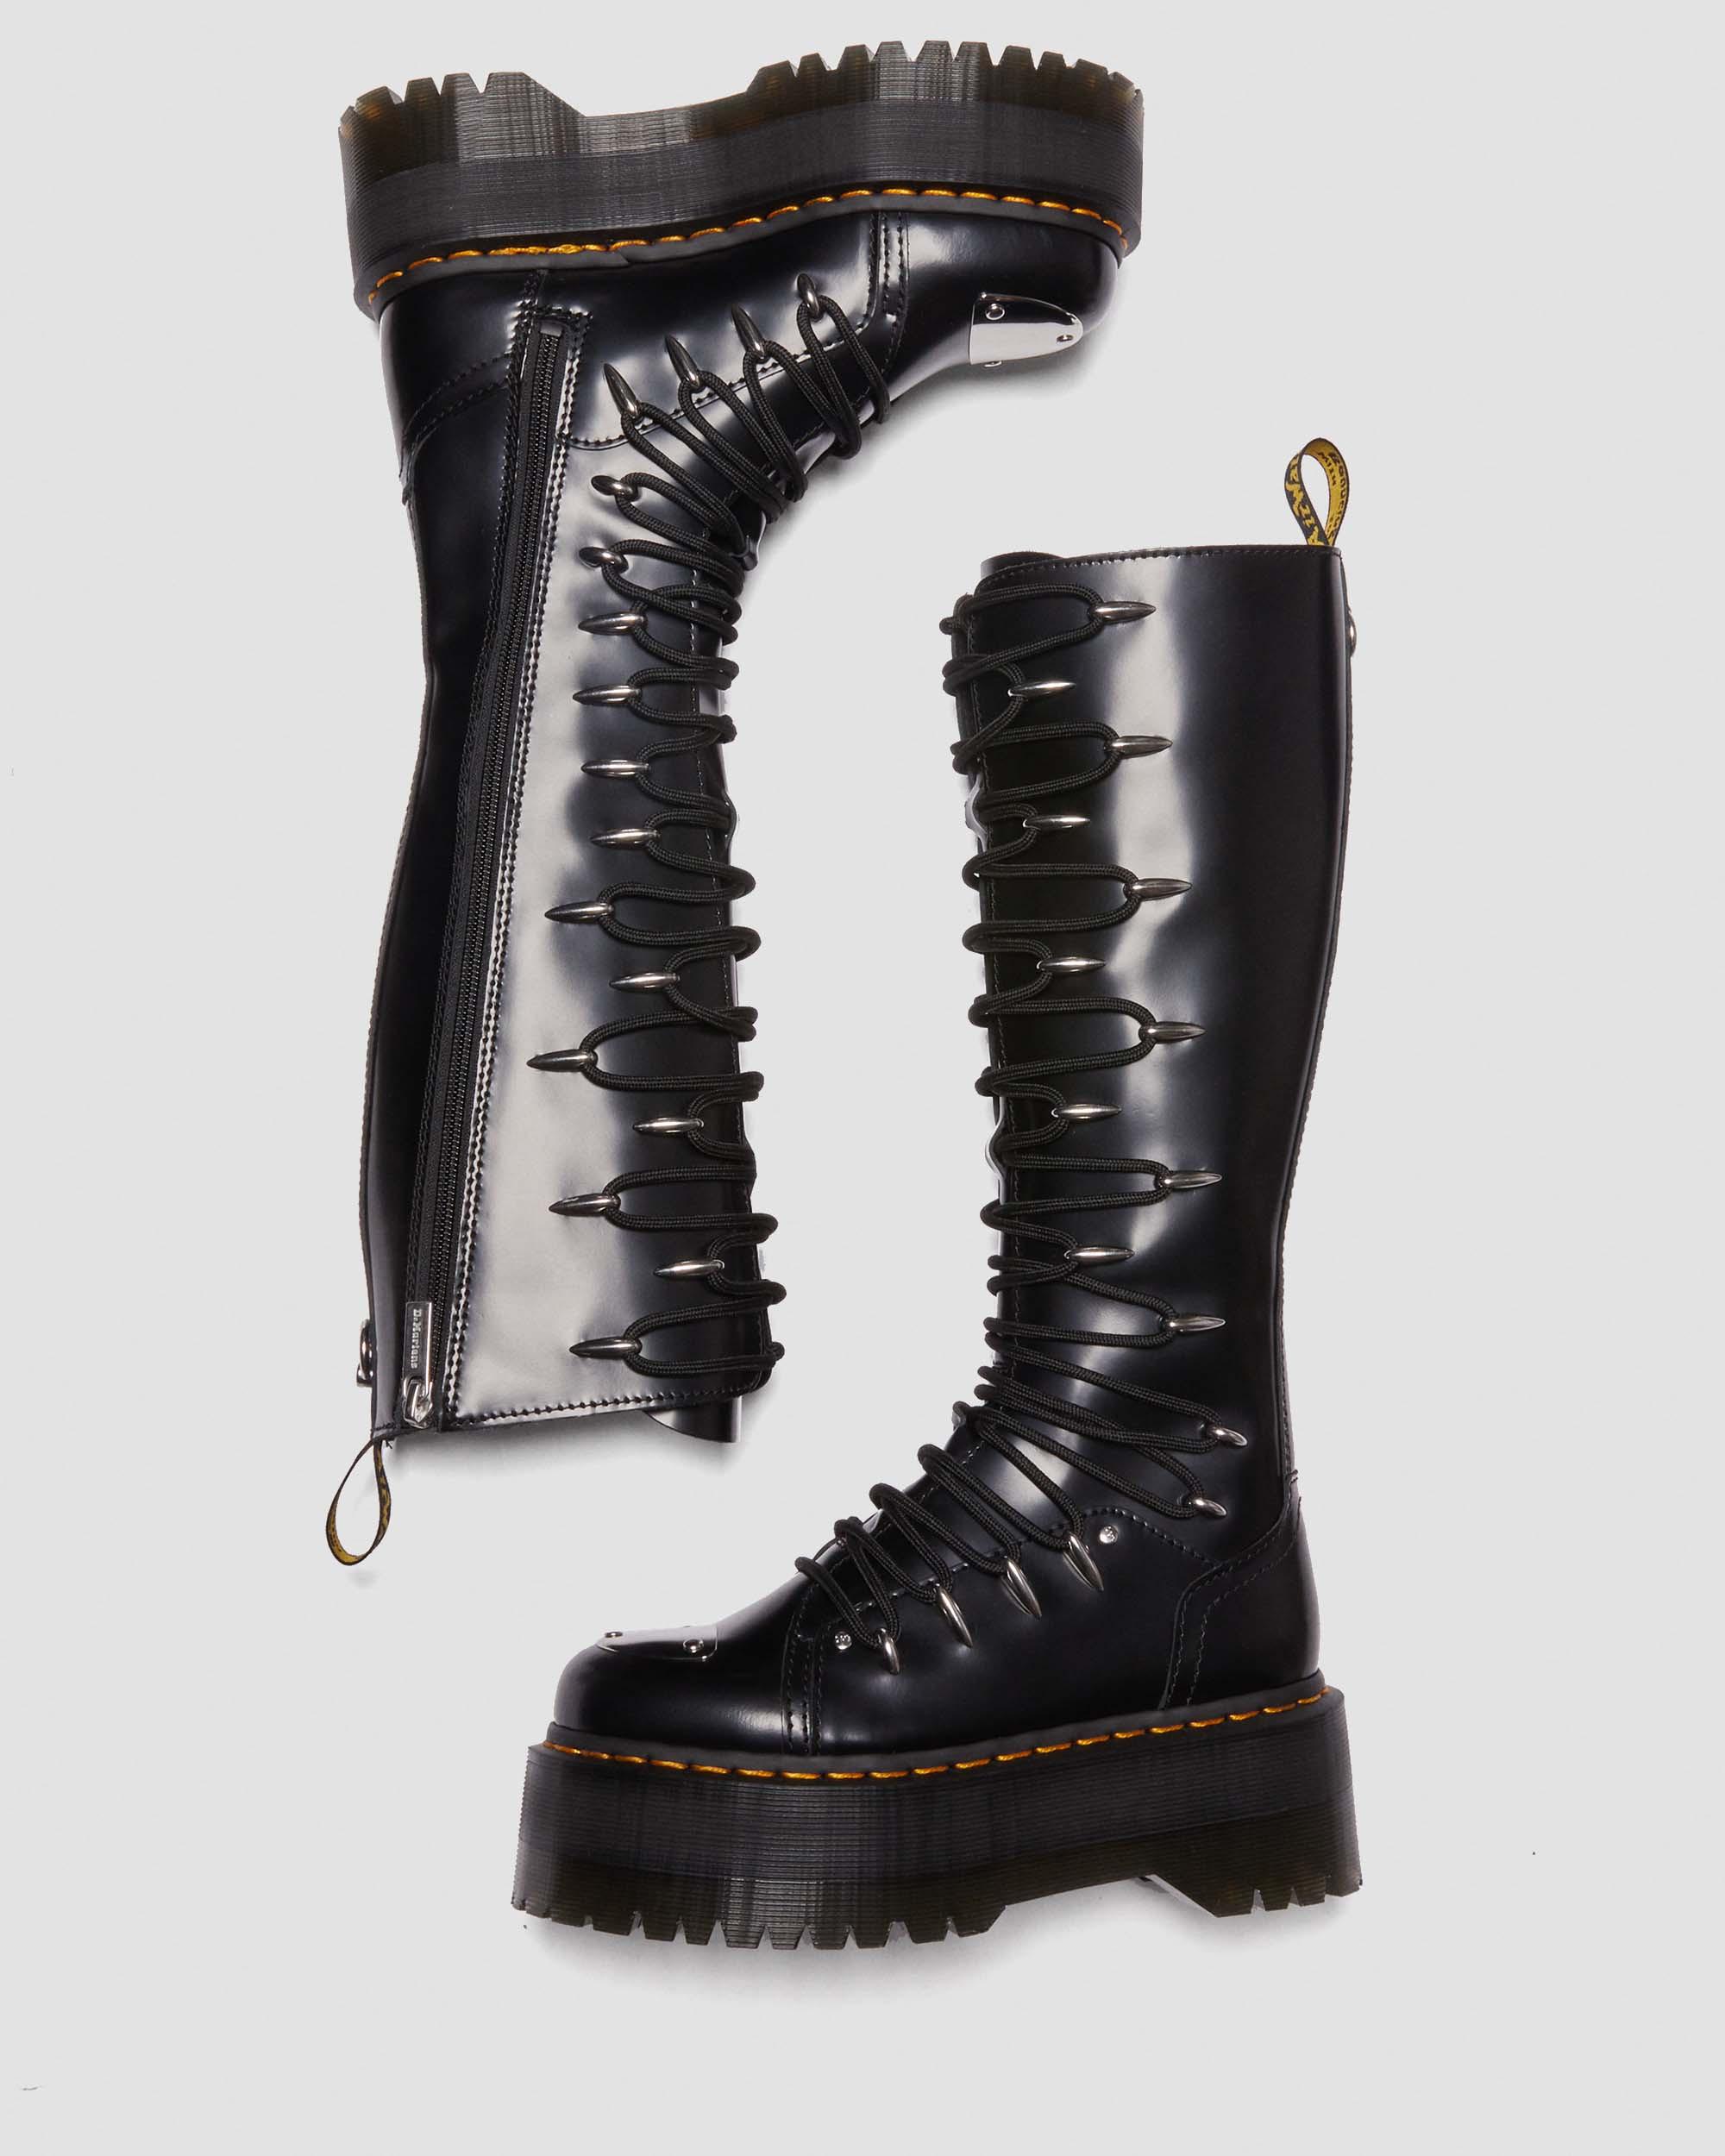 1B60 Max Lace Up Knee High Platform Boots in Black